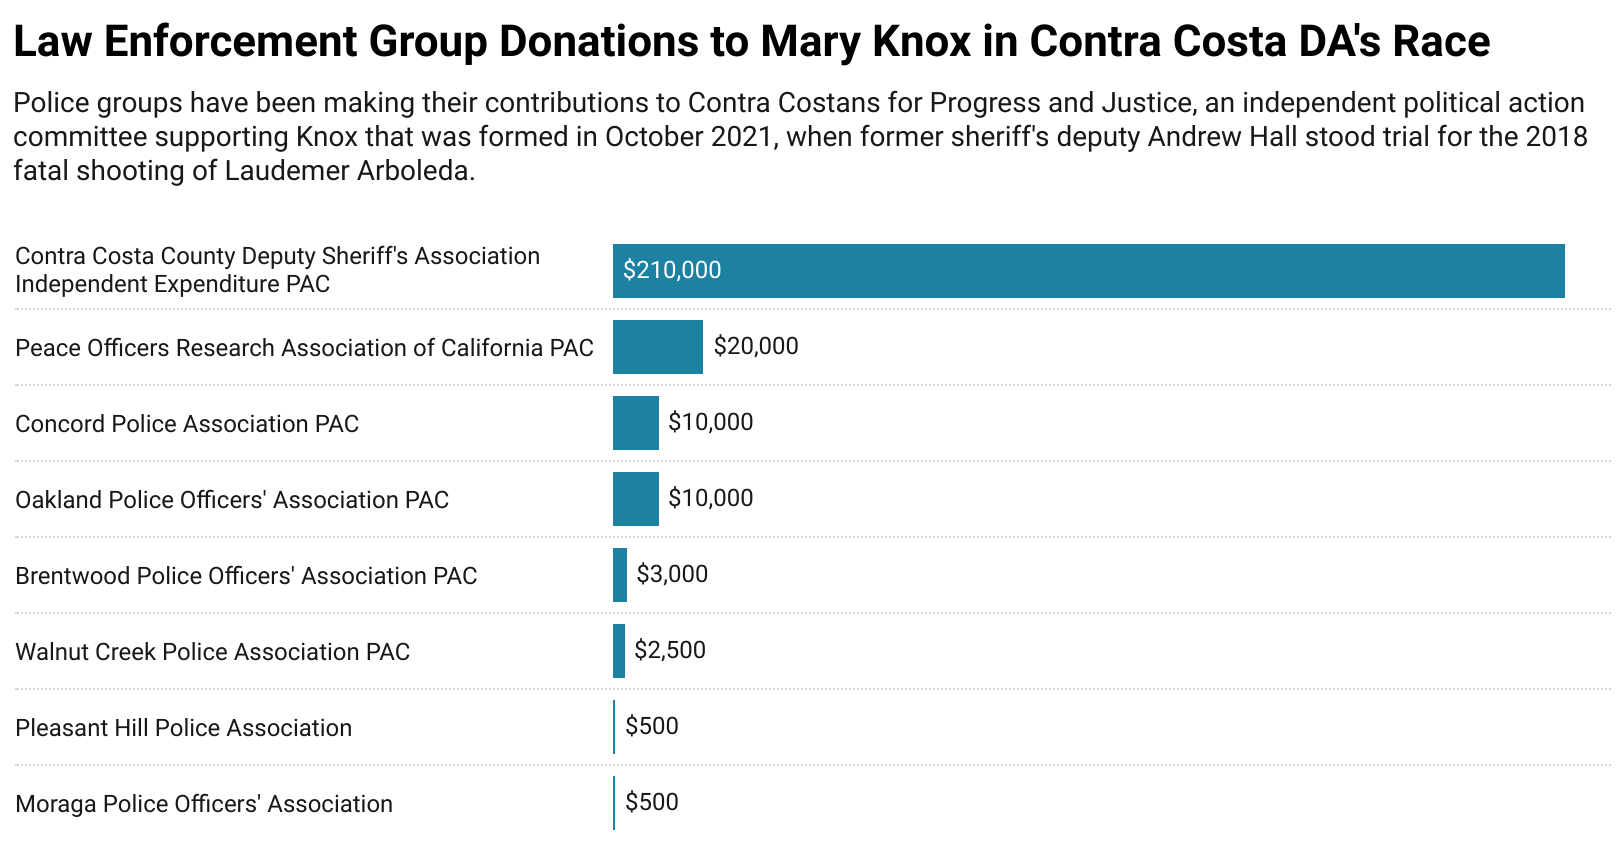 Horizontal bar chart of police group donations to the Contra Costa District Attorney's race.